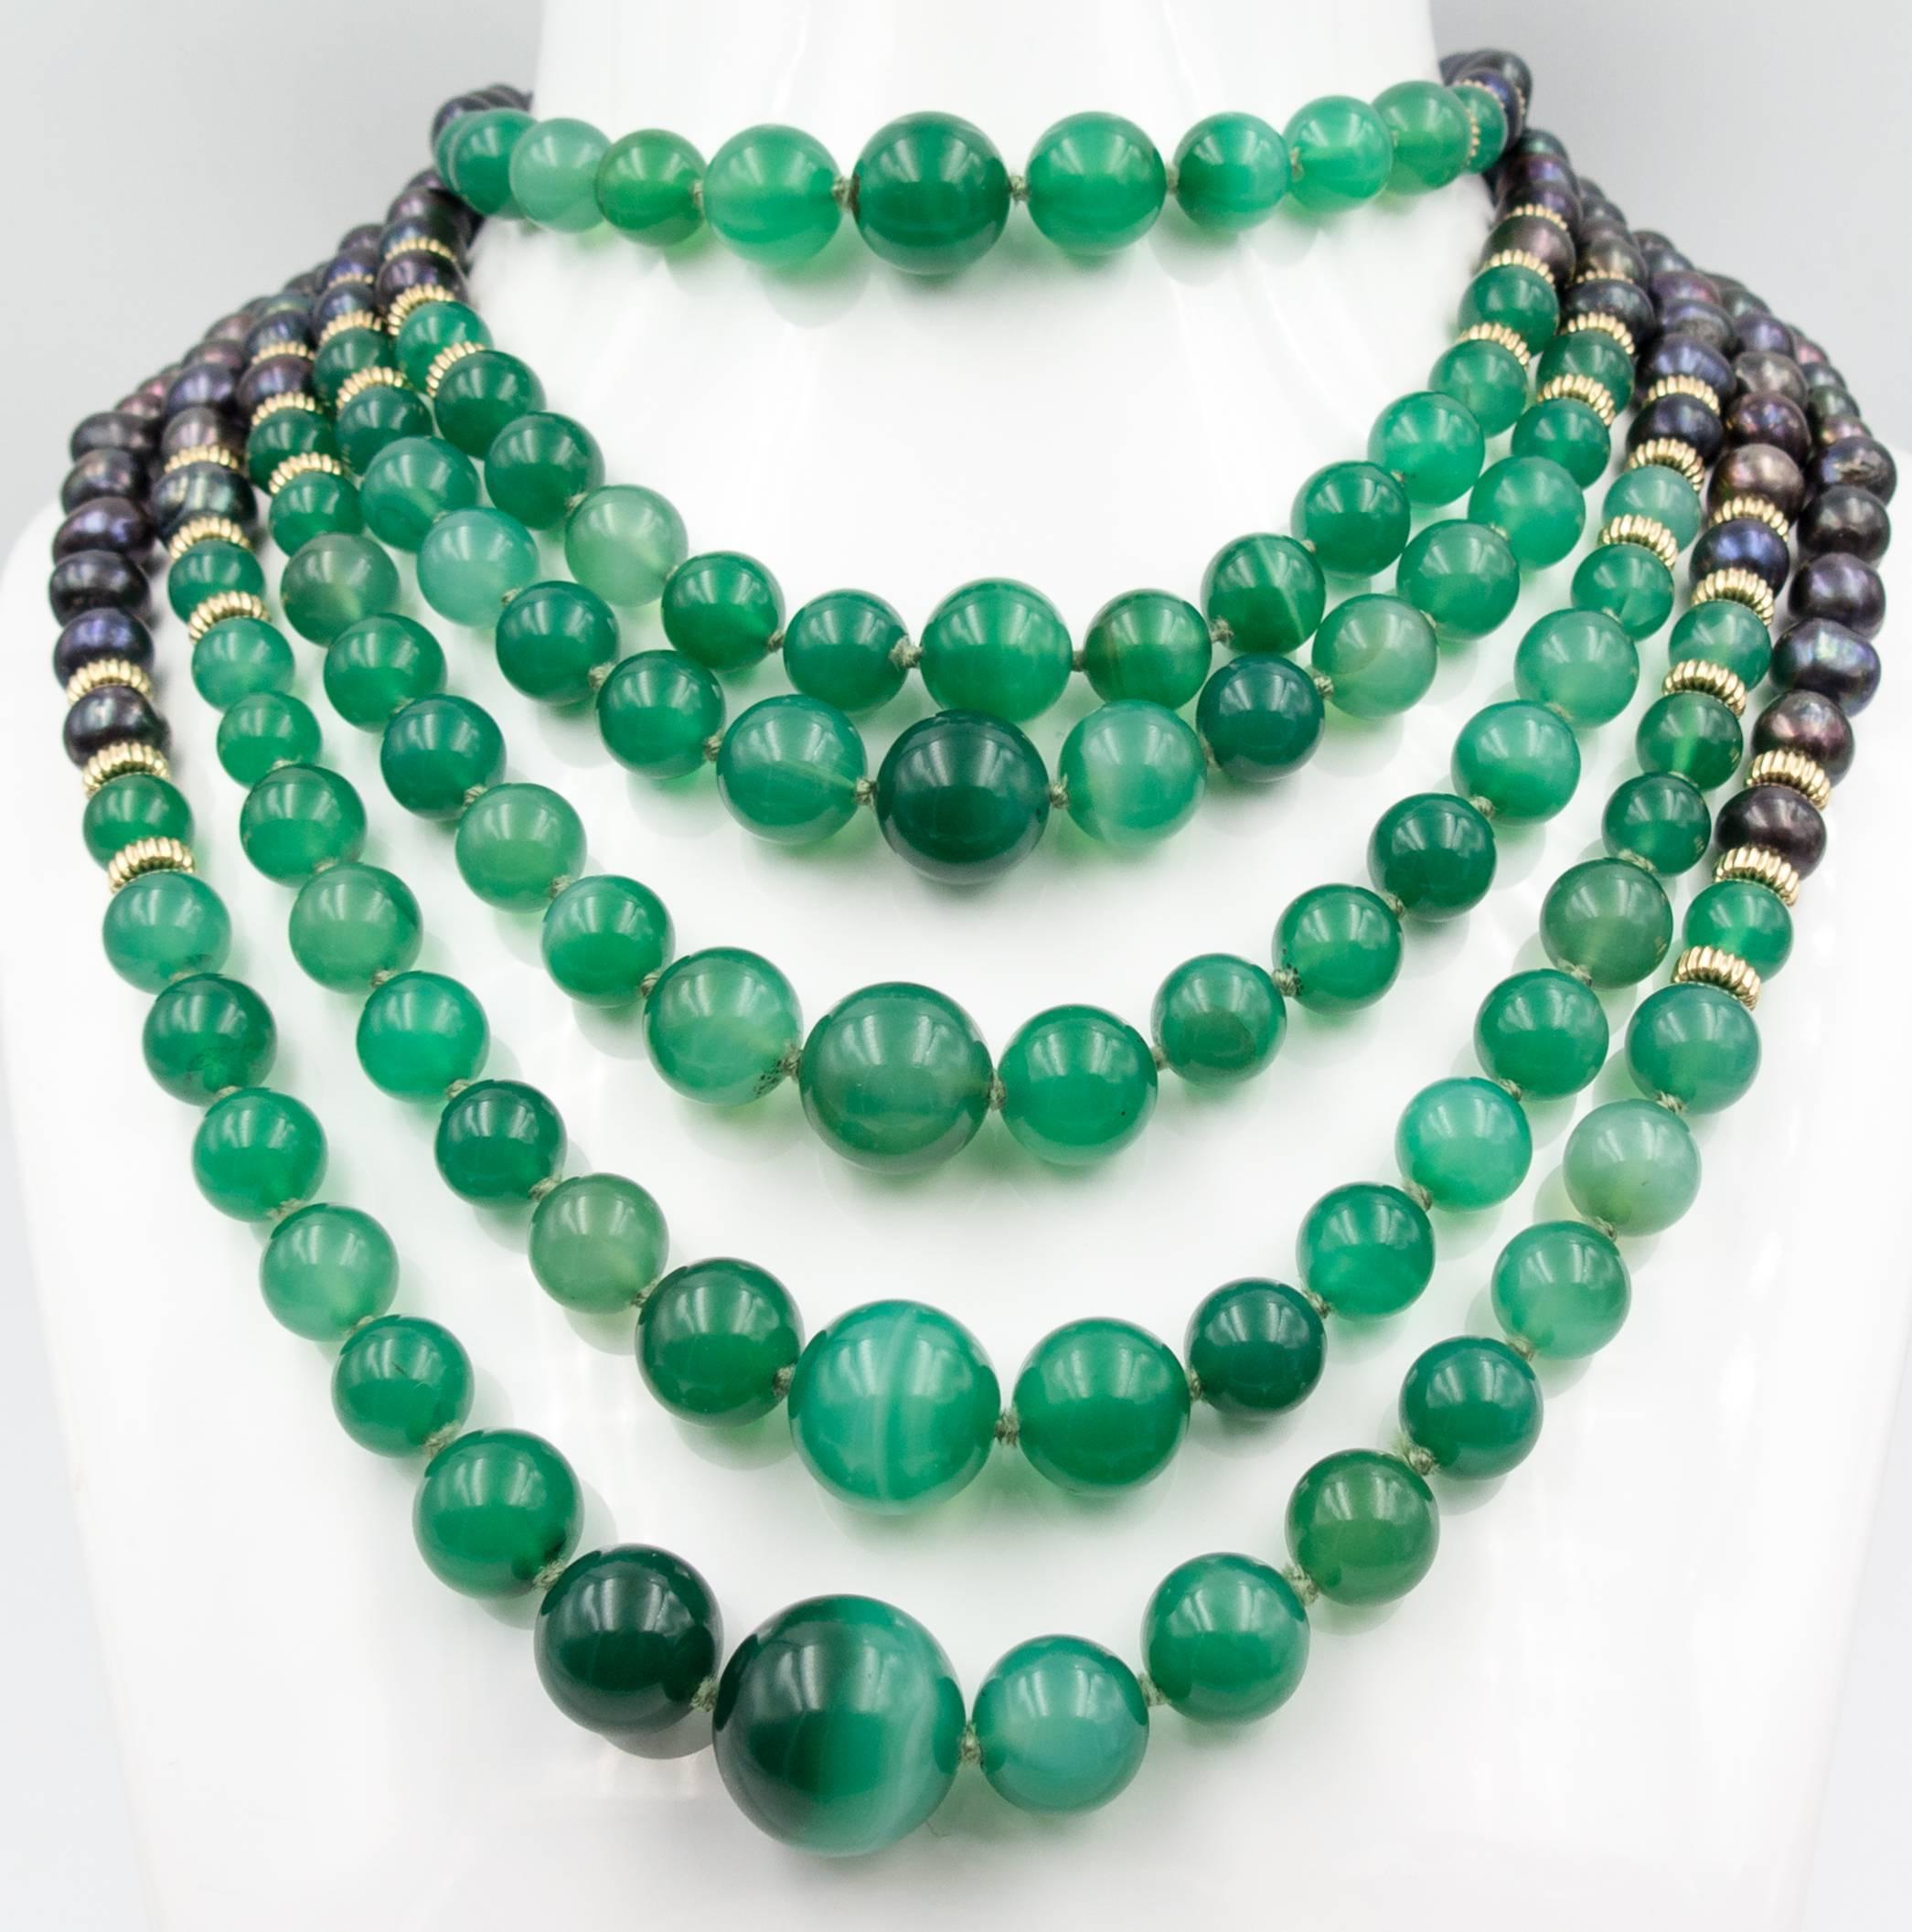 Women's Chic Gold Green Onyx Black Pearl Multistrand Necklace